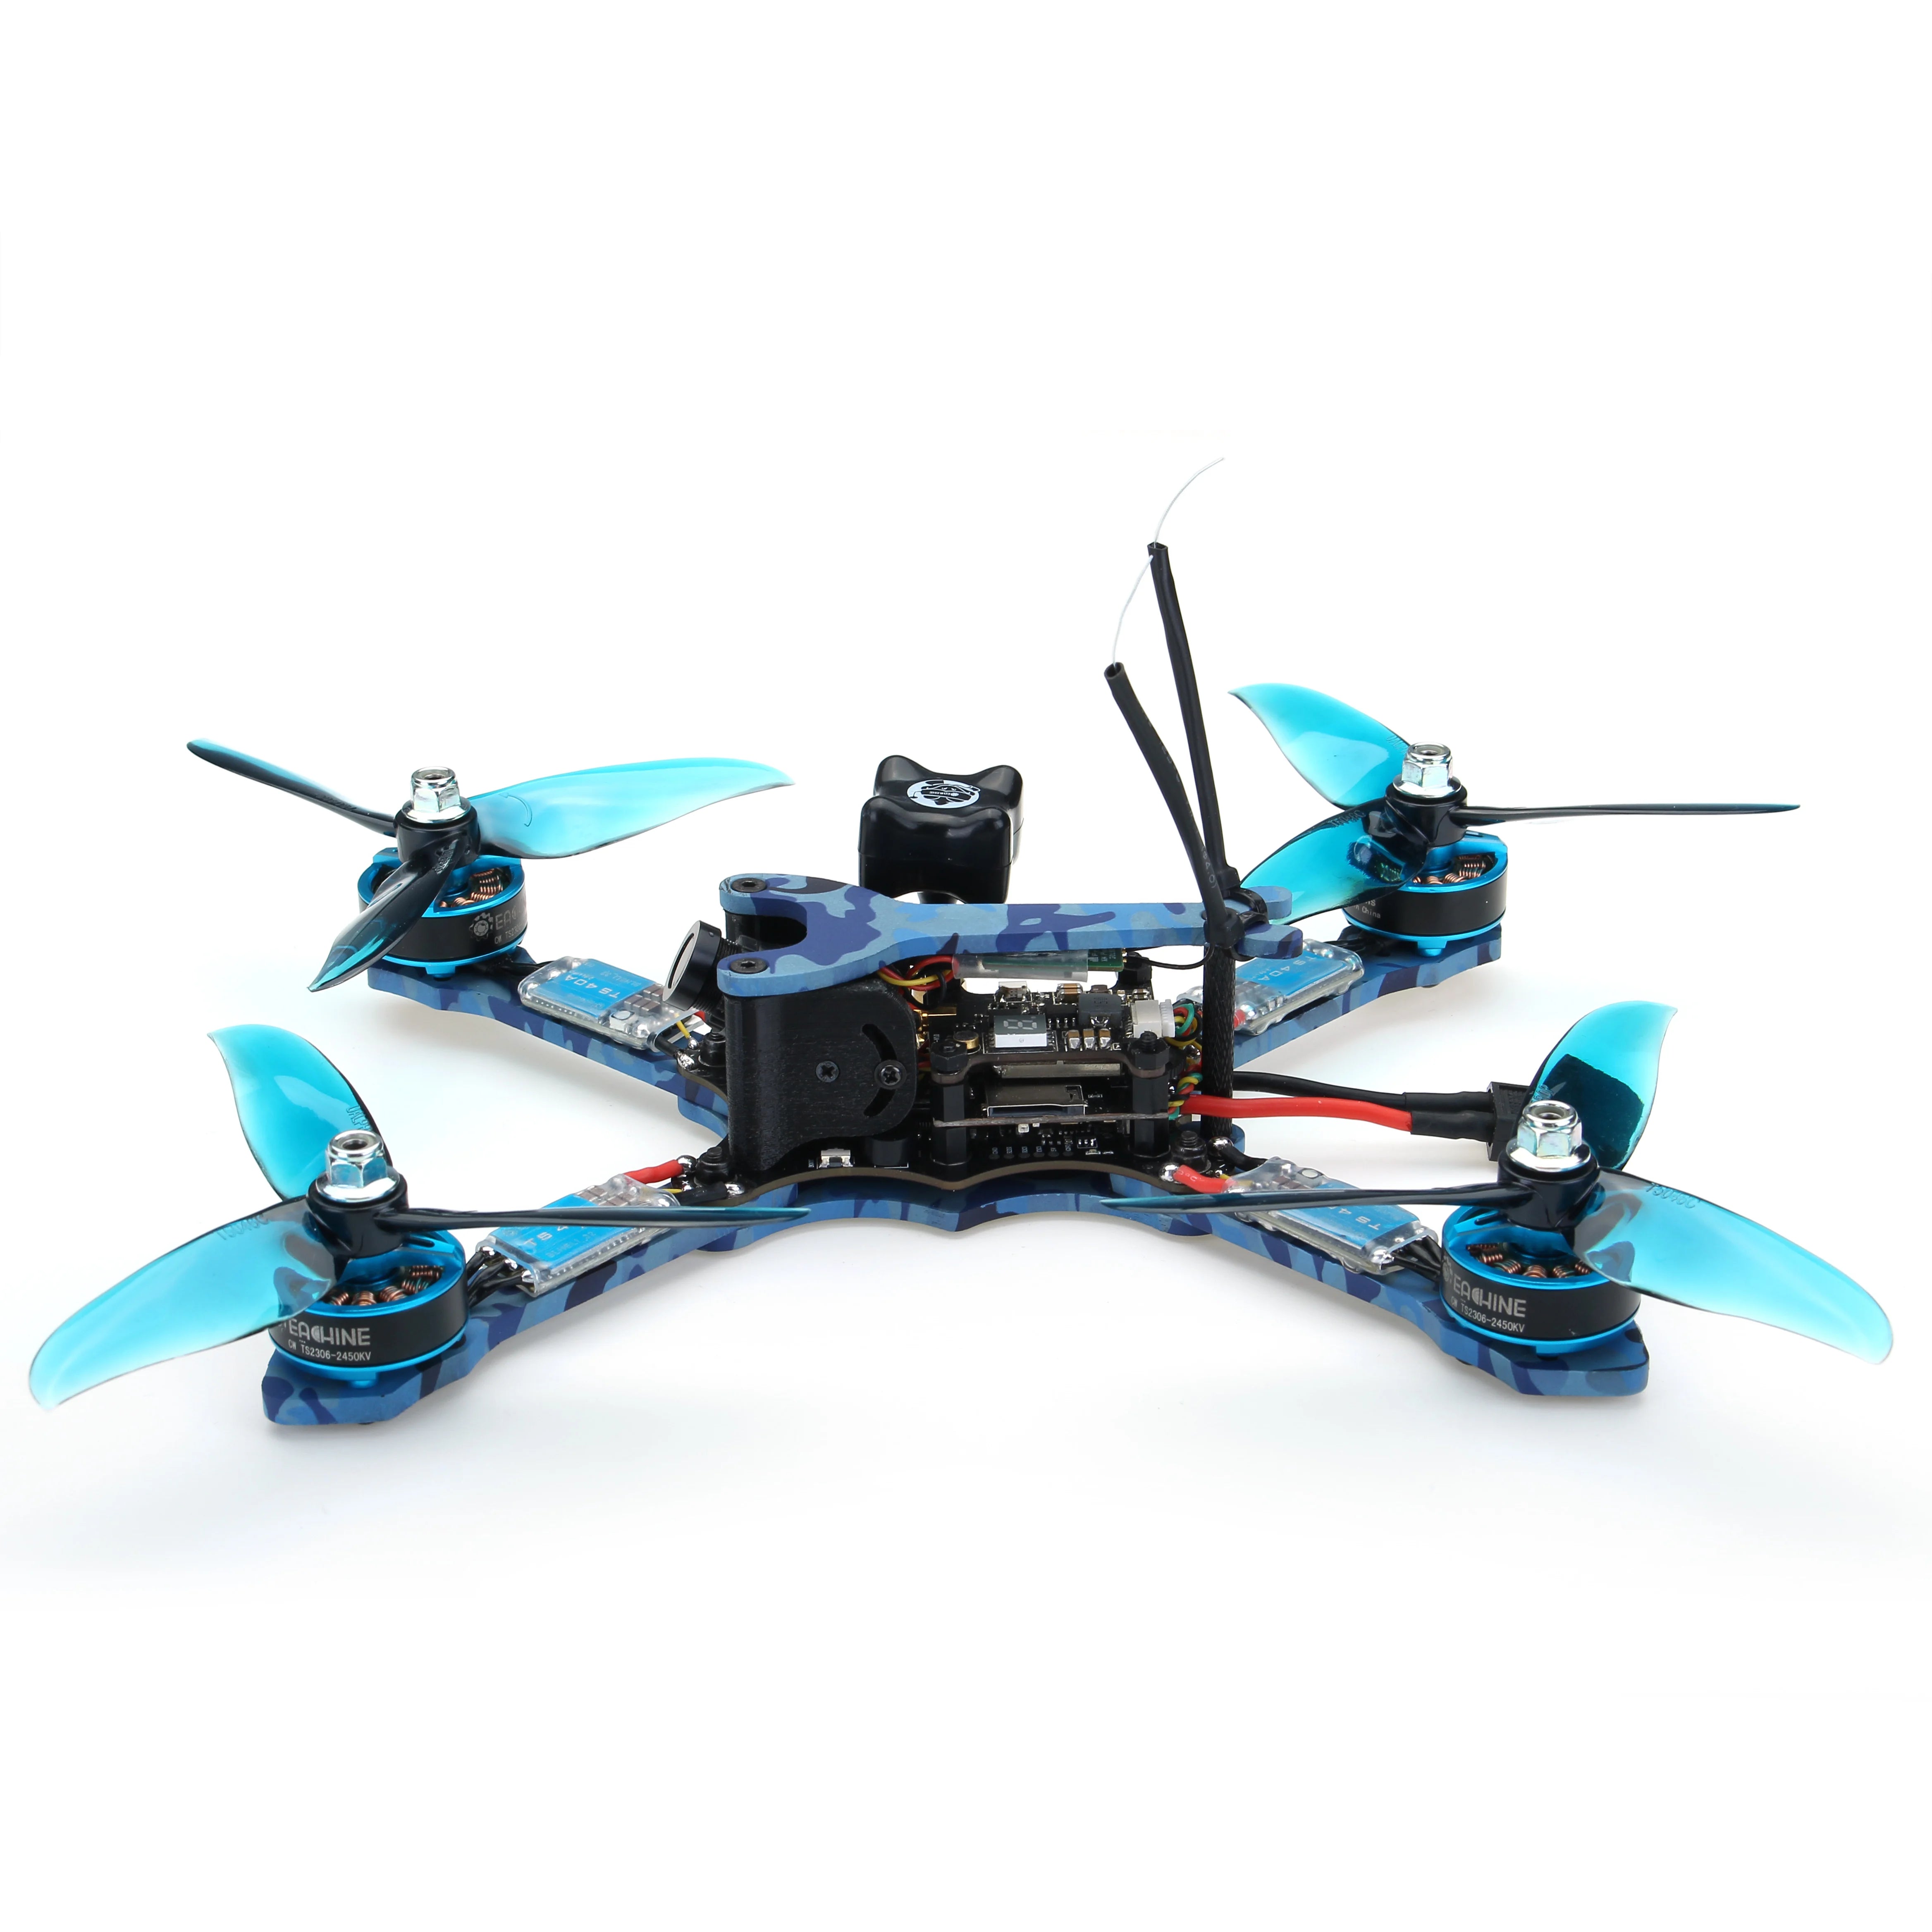 TCMMRC TS215 Rc Drone, storage board: Support 720p high definition recording Maximum support for 32g memory cards .